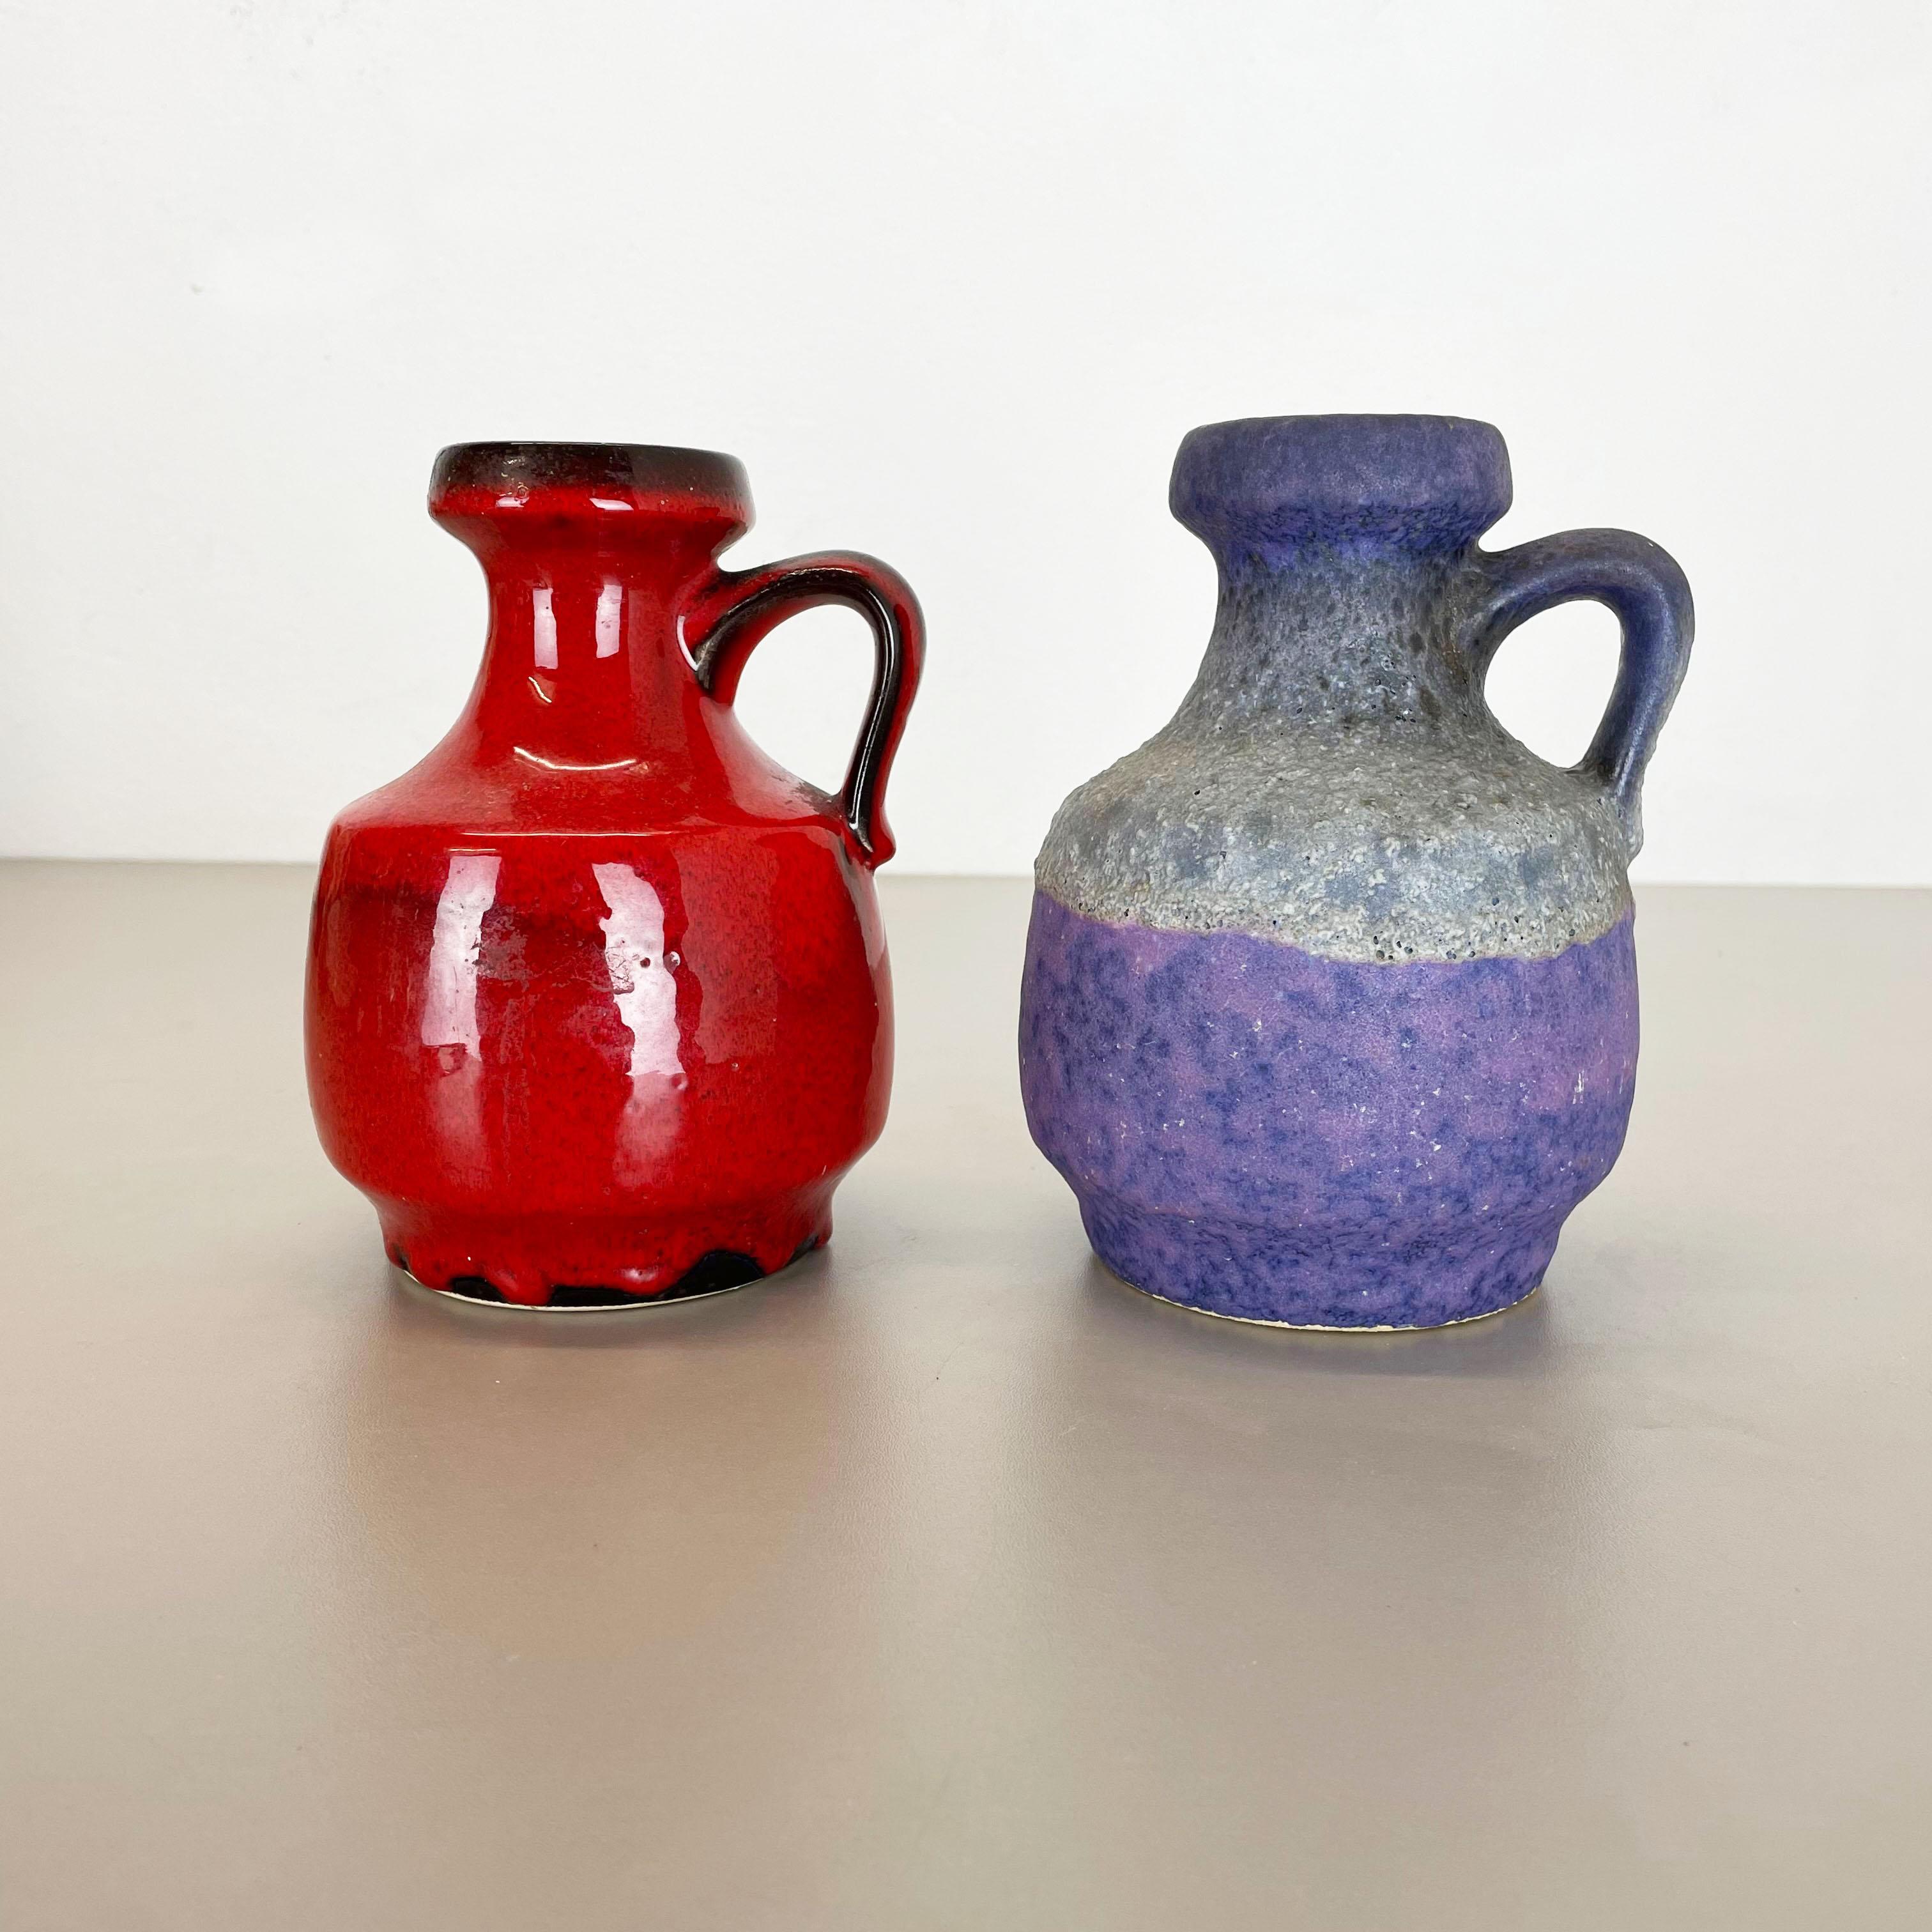 Article:

Set of two fat lava art vases

Model:
020/16




Producer:

Jopeko Ceramics, Germany



Decade:

1970s




These original vintage vases was produced in the 1970s in Germany. It is made of ceramic pottery in fat lava